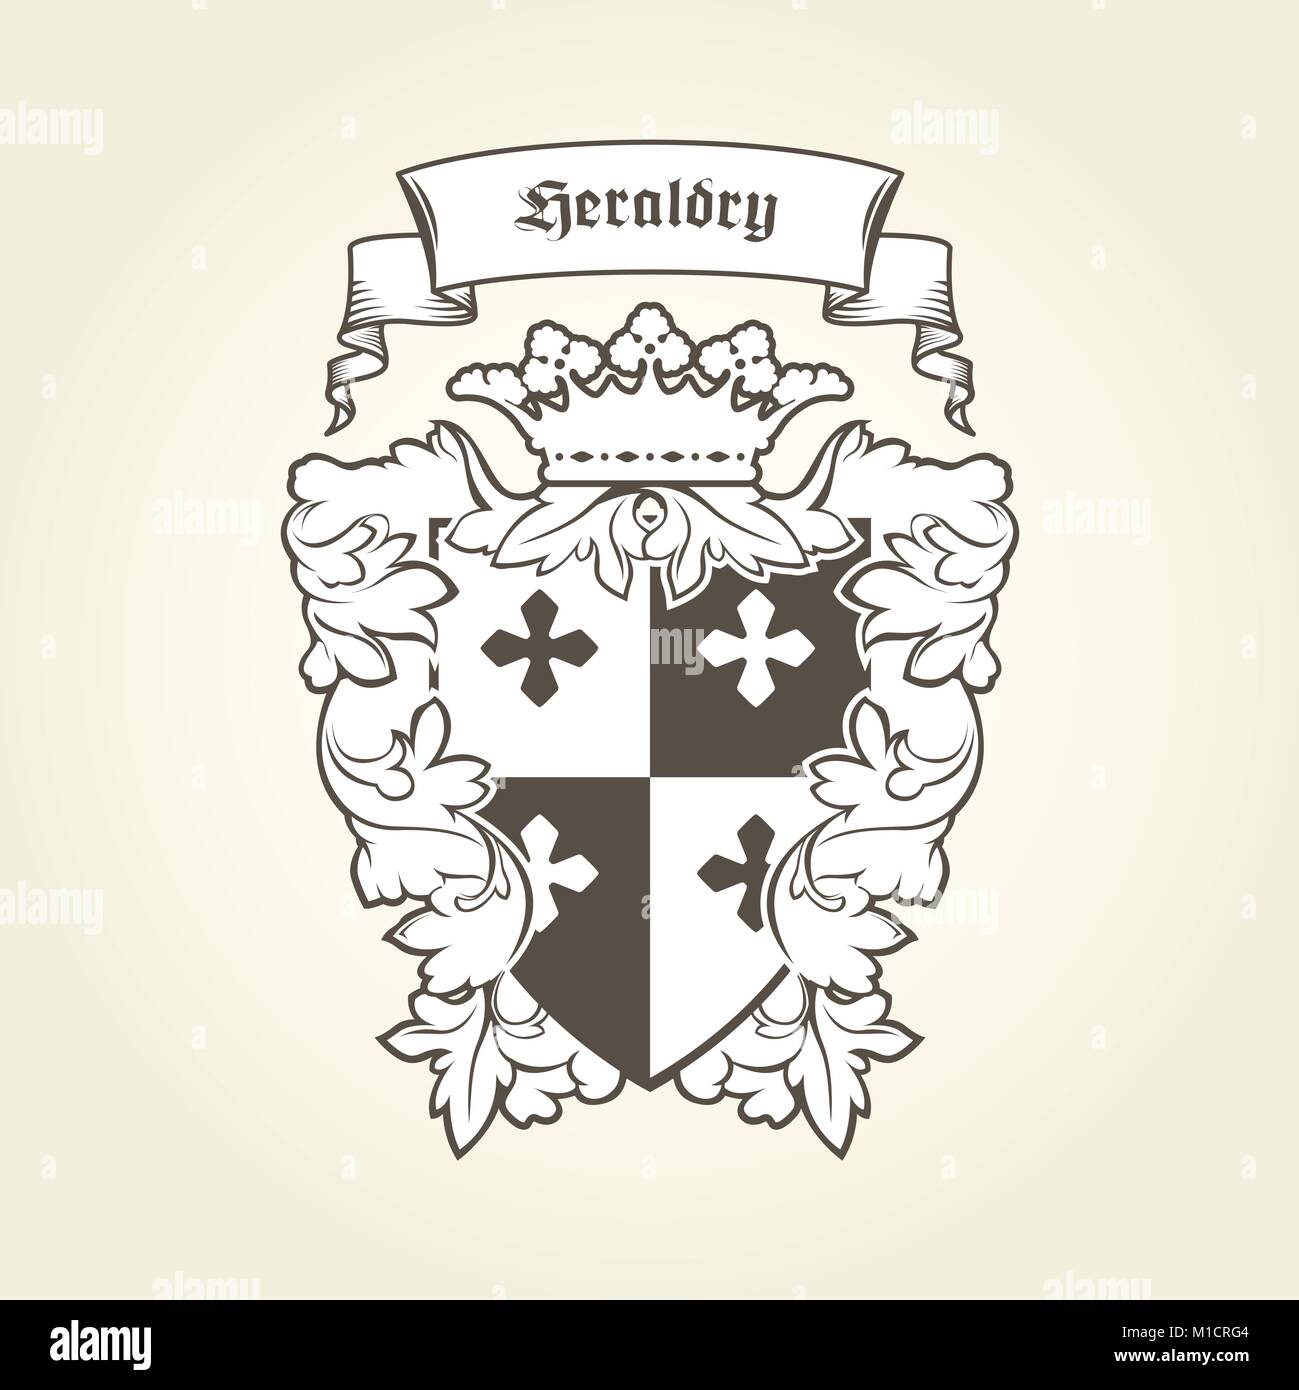 Heraldic royal coat of arms with imperial symbols, shield, crown and banner Stock Vector